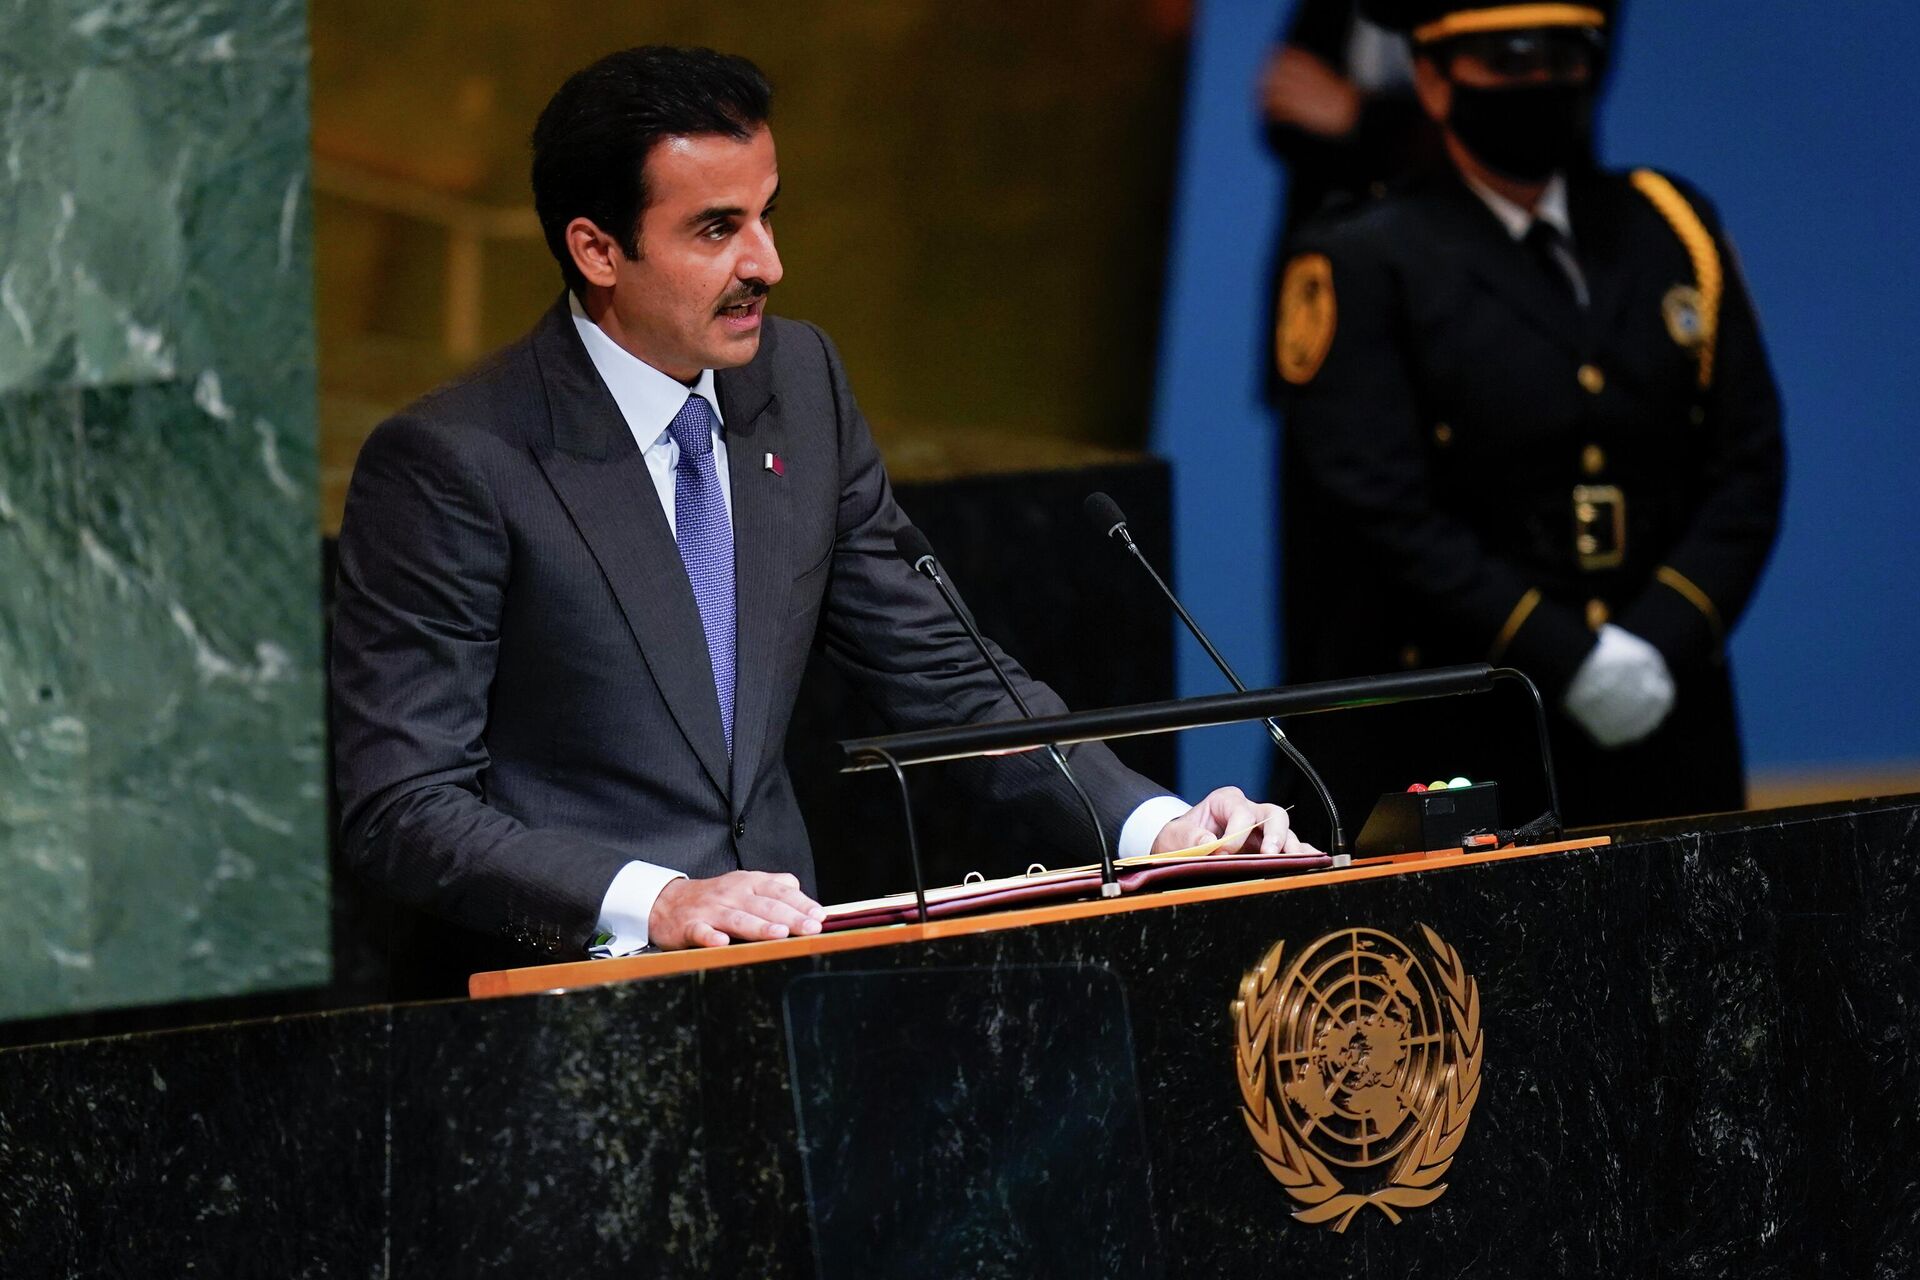 Sheikh Tamim Bin Hamad Al-Thani, the Emir of Qatar, addresses the 77th session of the General Assembly at United Nations headquarters, Tuesday, Sept. 20, 2022 - Sputnik International, 1920, 22.09.2022